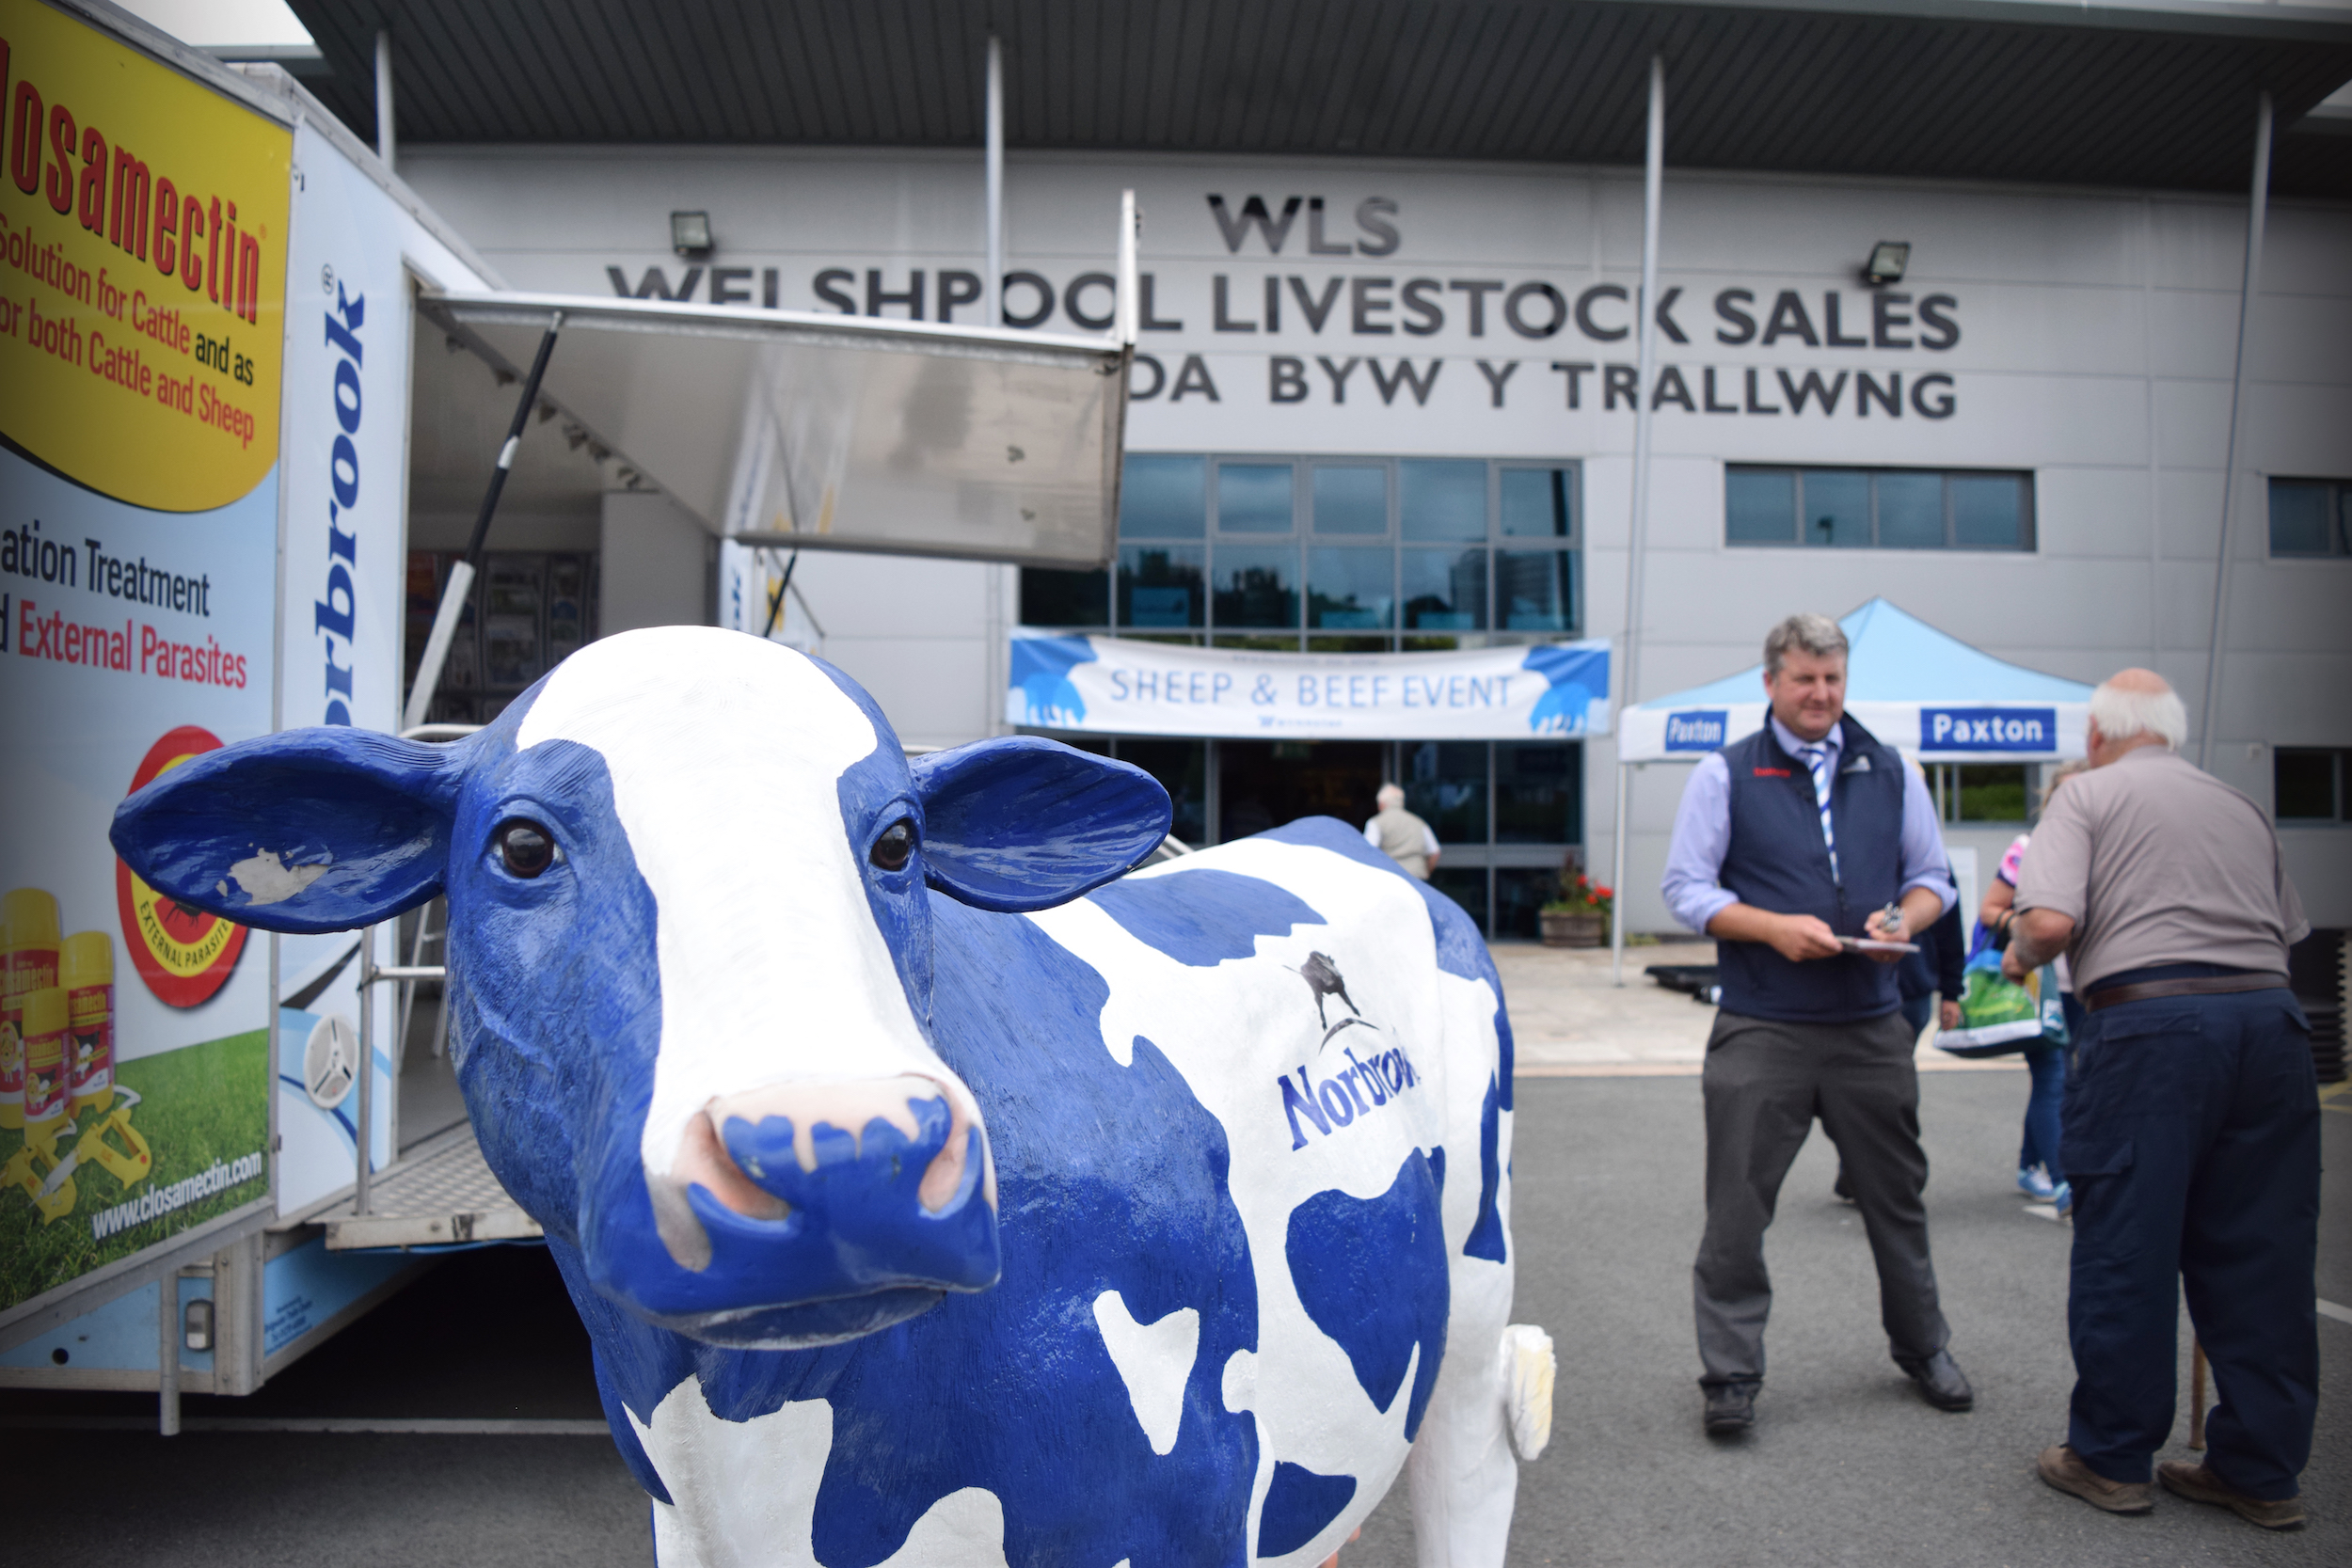 500 people flocked to the Sheep and Beef Event at Welshpool Market